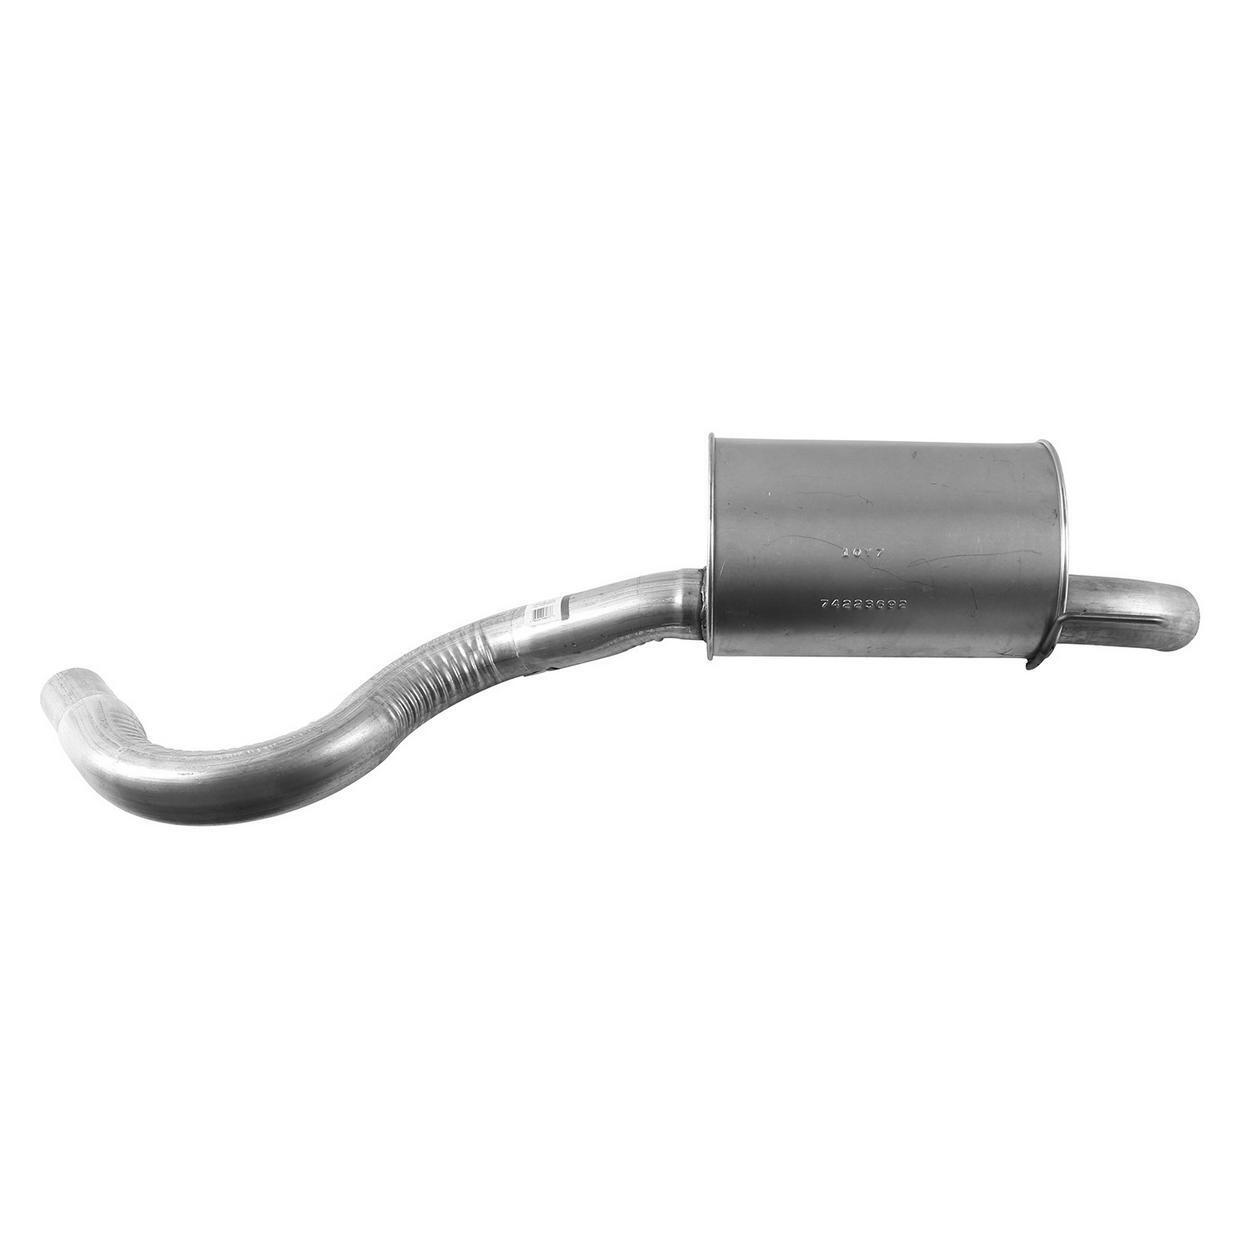 54192-AA Exhaust Tail Pipe Fits 2007 Chrysler Aspen 5.7L V8 GAS OHV